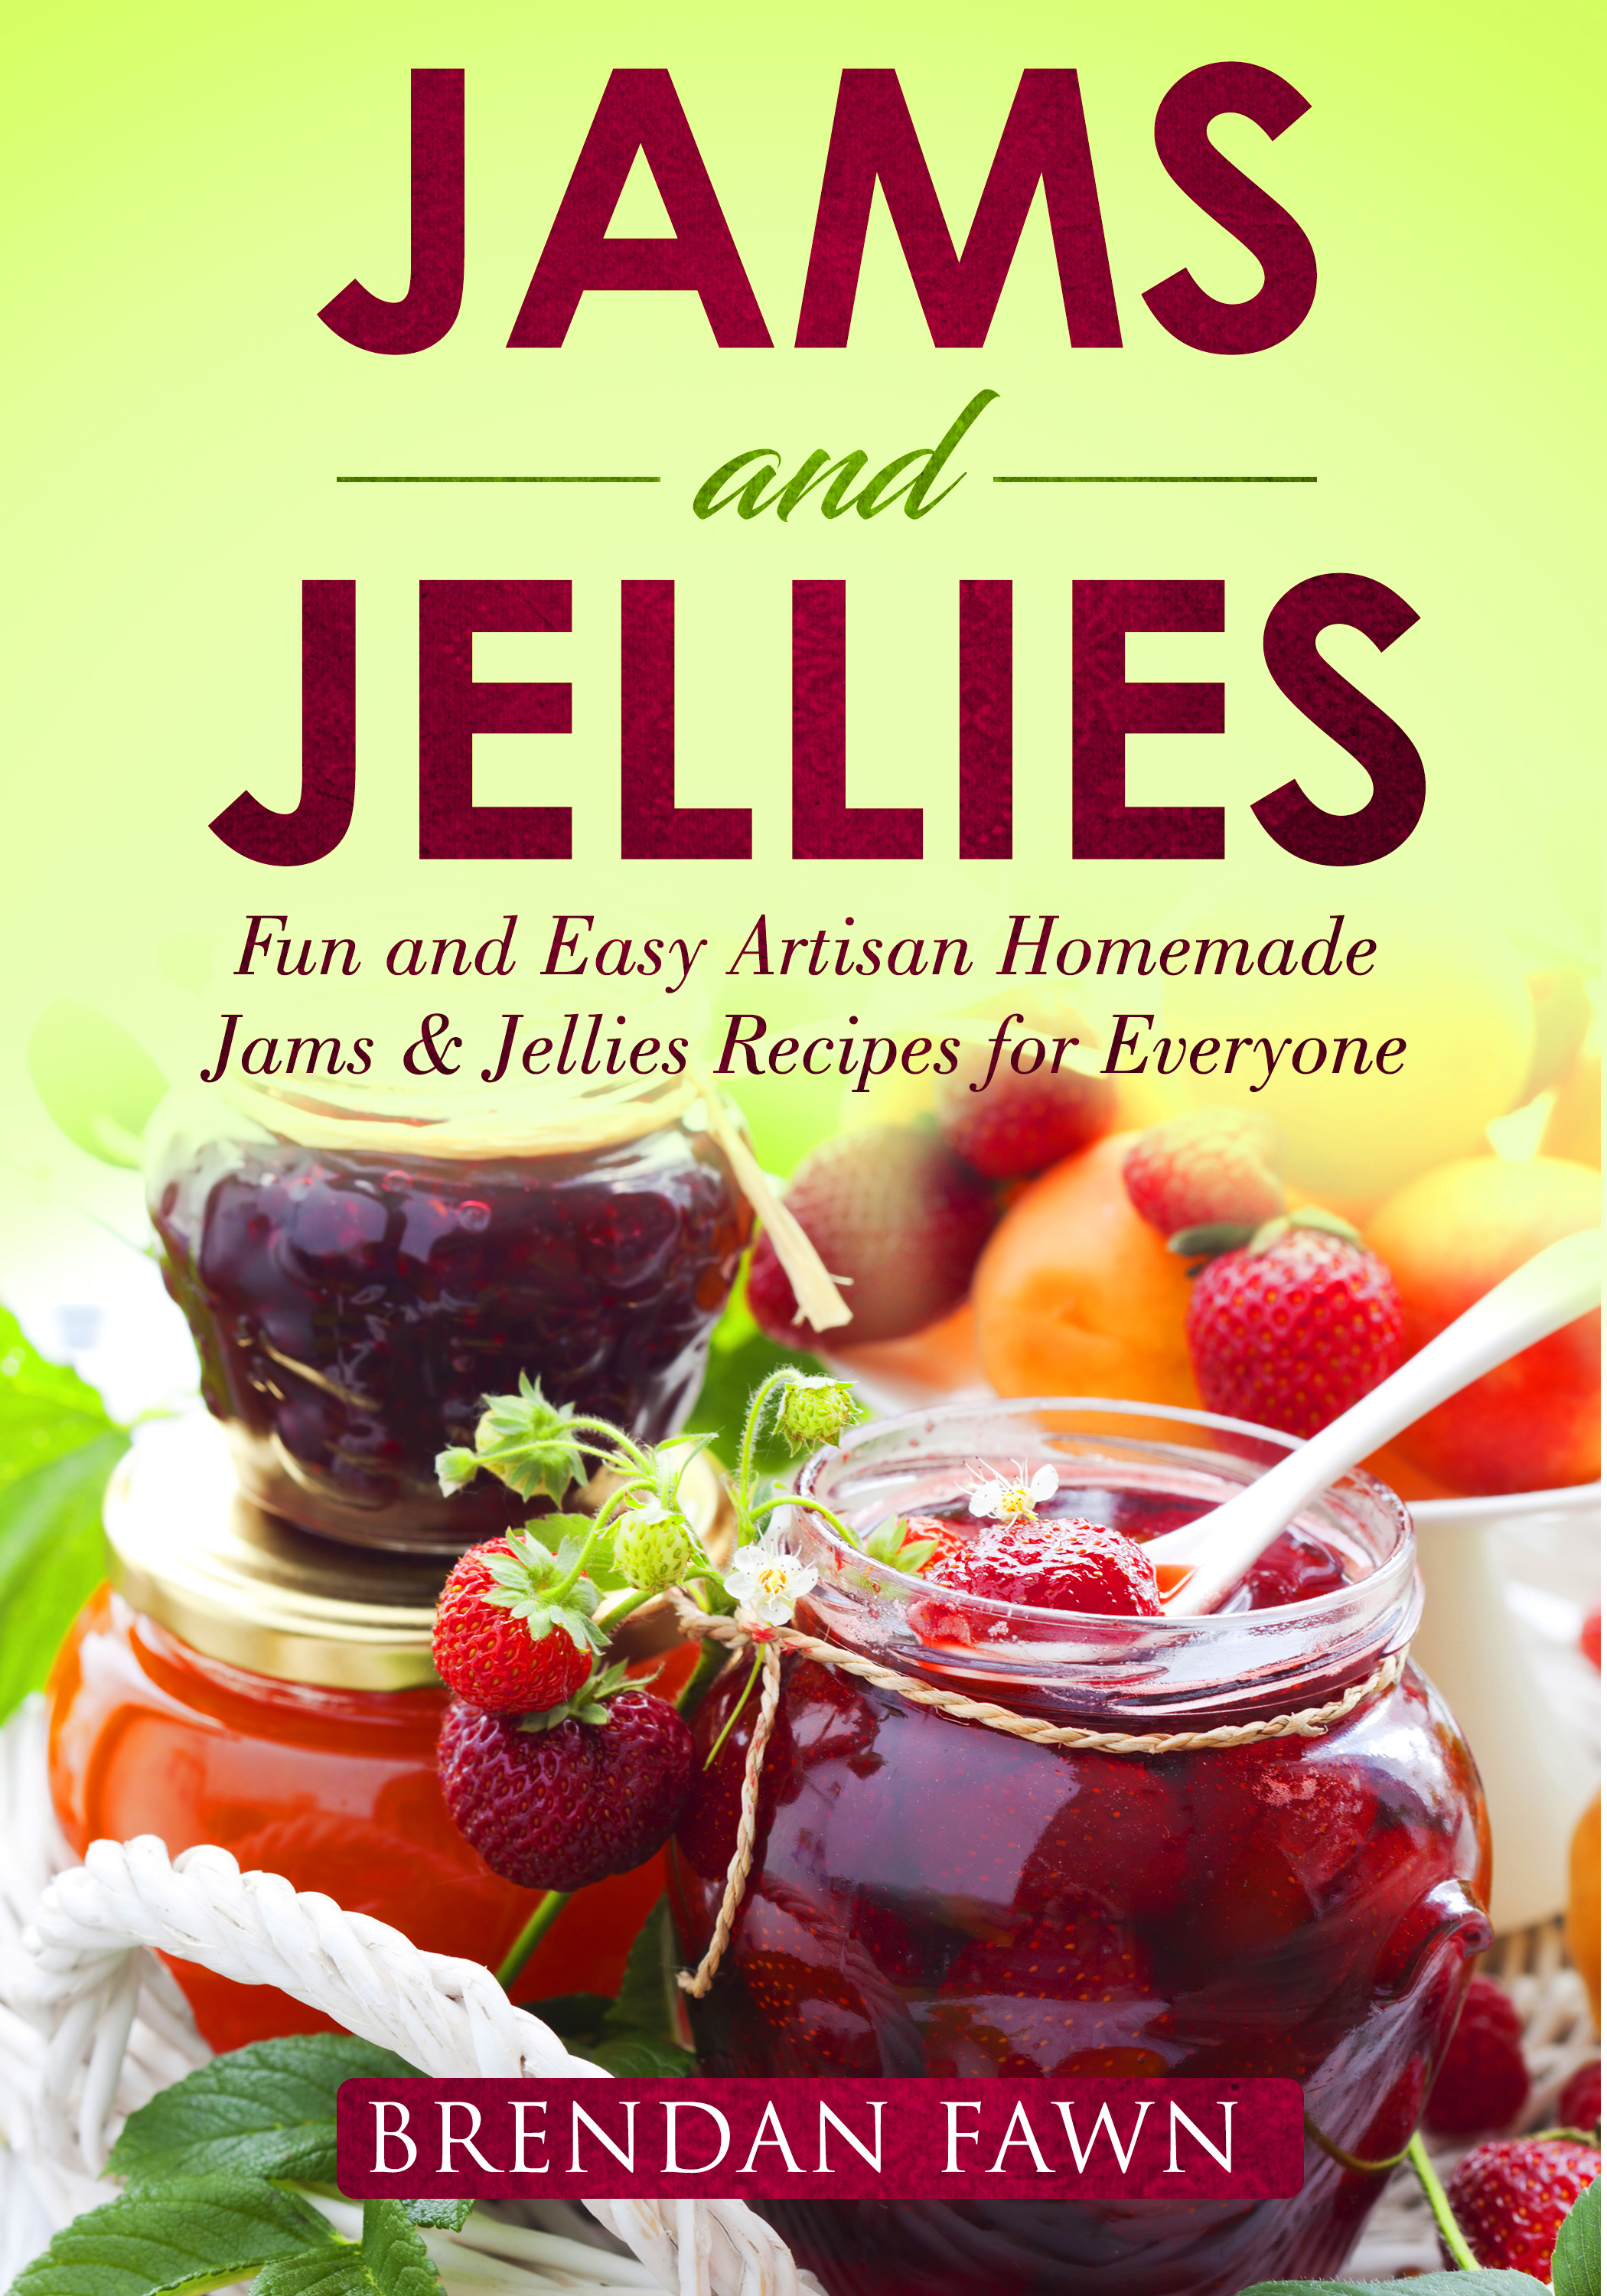 FREE: Jams and Jellies: Fun and Easy Artisan Homemade Jams & Jellies Recipes for Everyone by Brendan Fawn